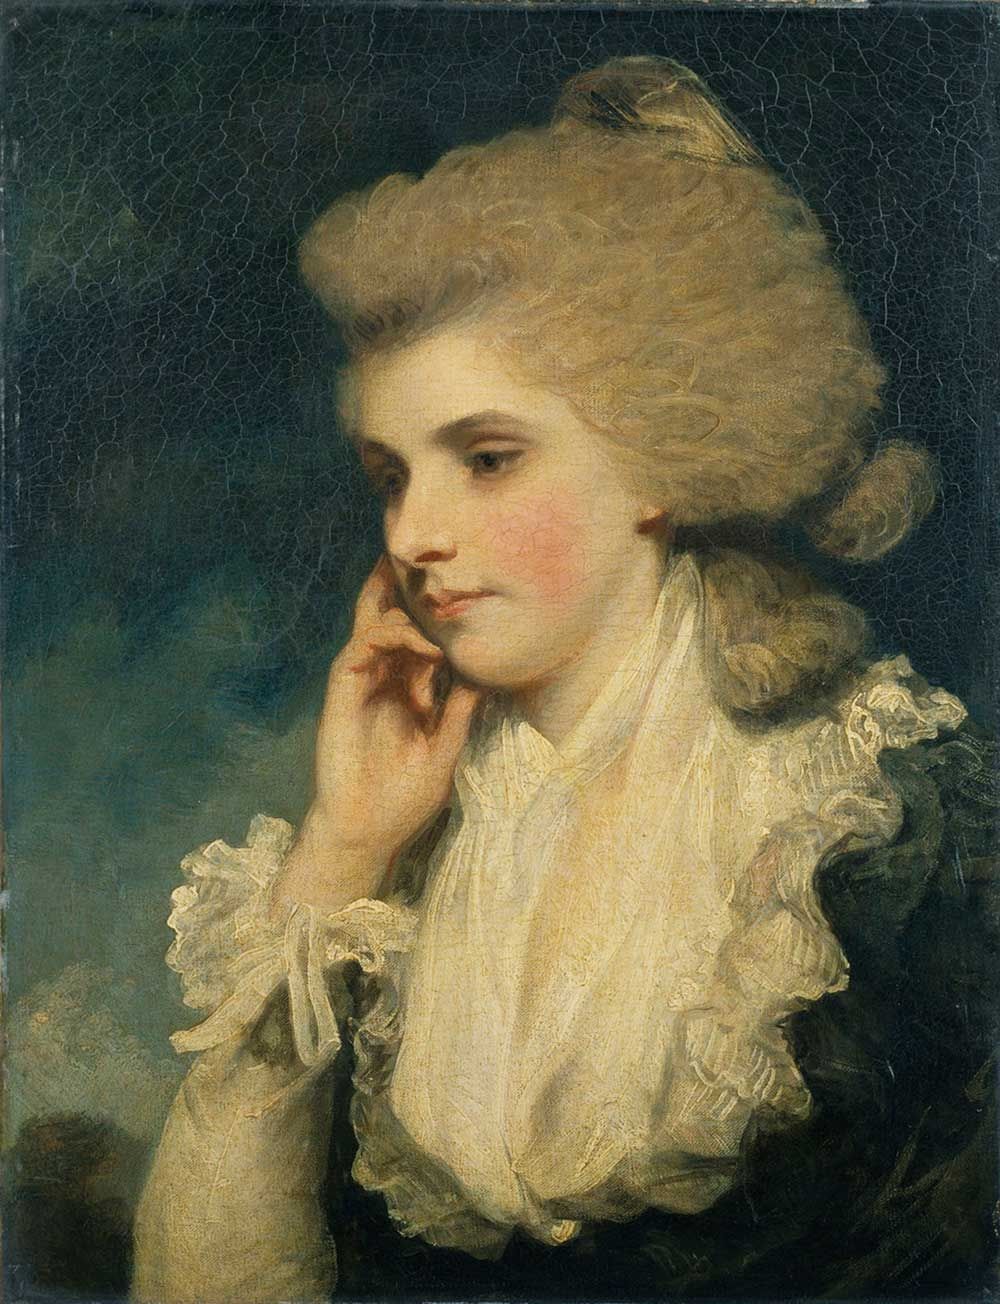 Joshua Reynolds, Lady Frances, Countess of Lincoln, 1781–1782, oil on canvas, 24.4 x 18.5 inches